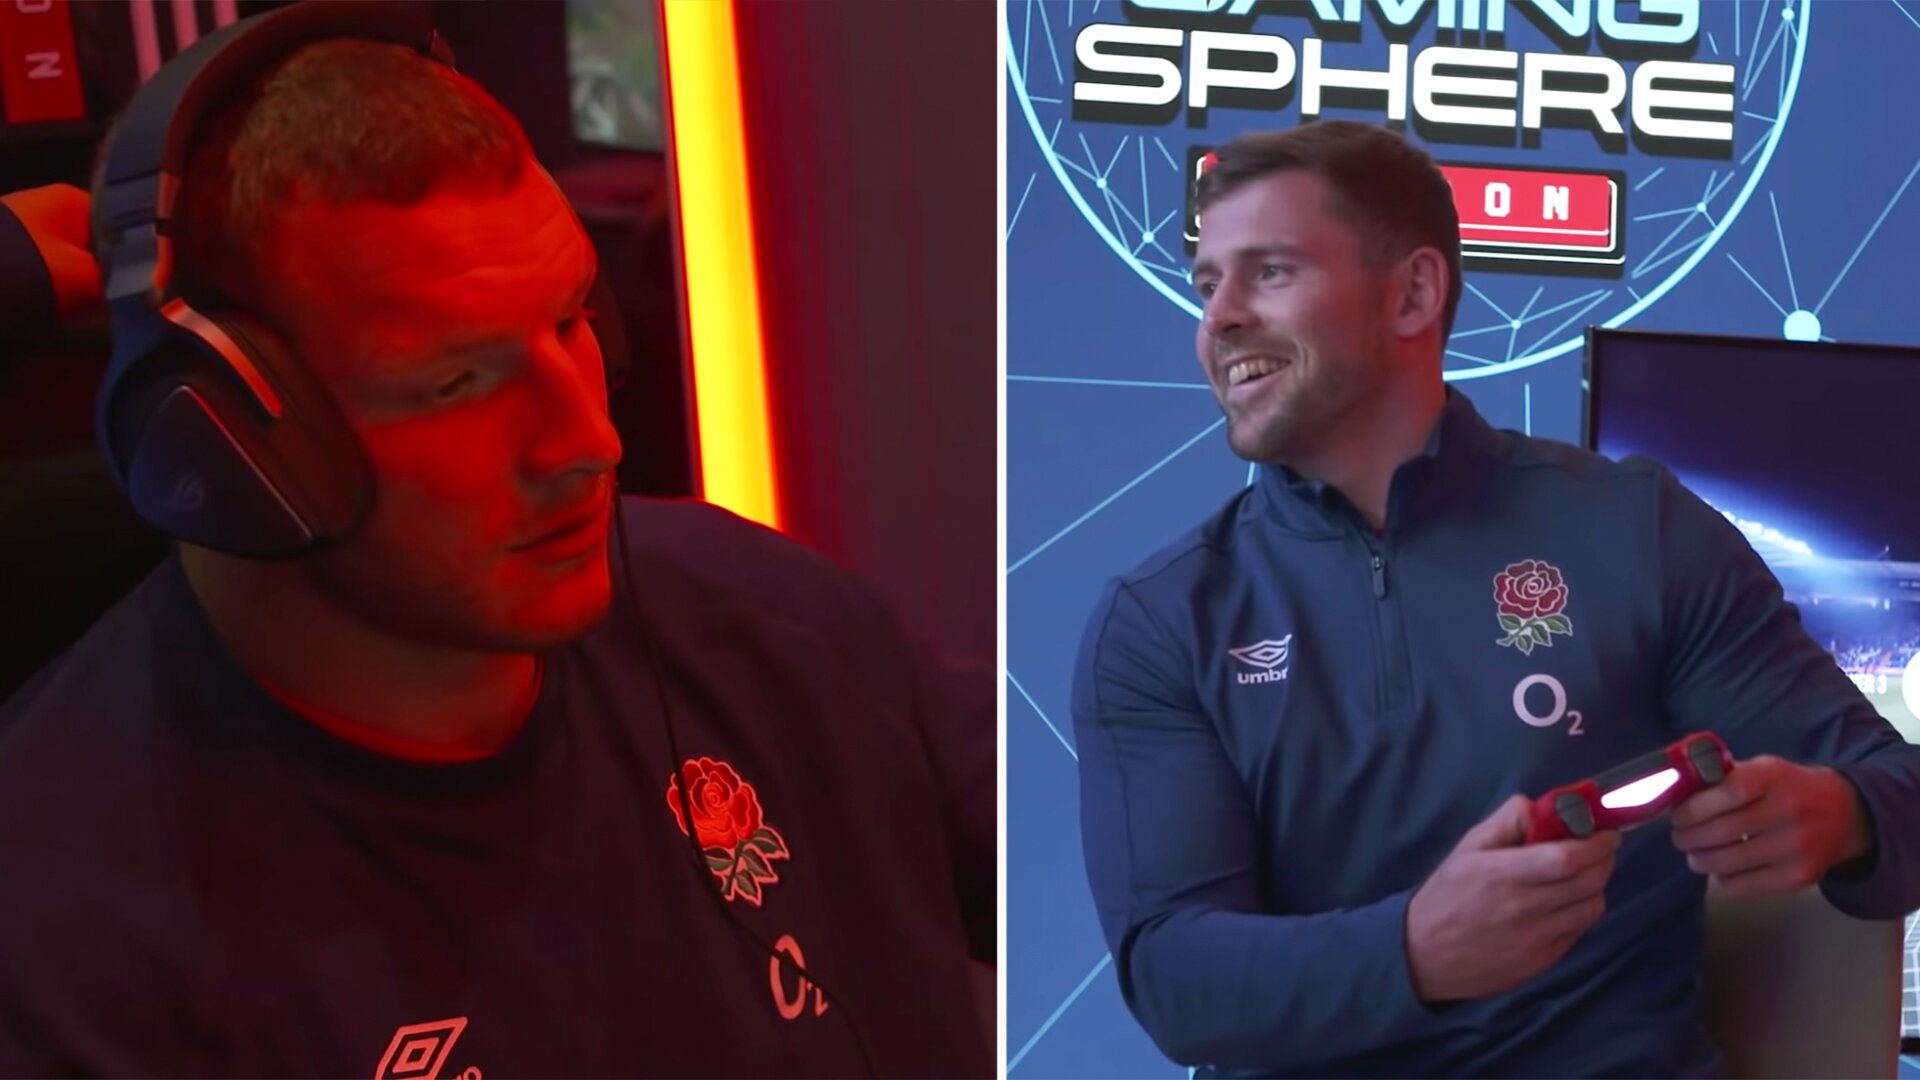 Red Bull have built an on site gaming centre for the England rugby team and it's unbelieavble